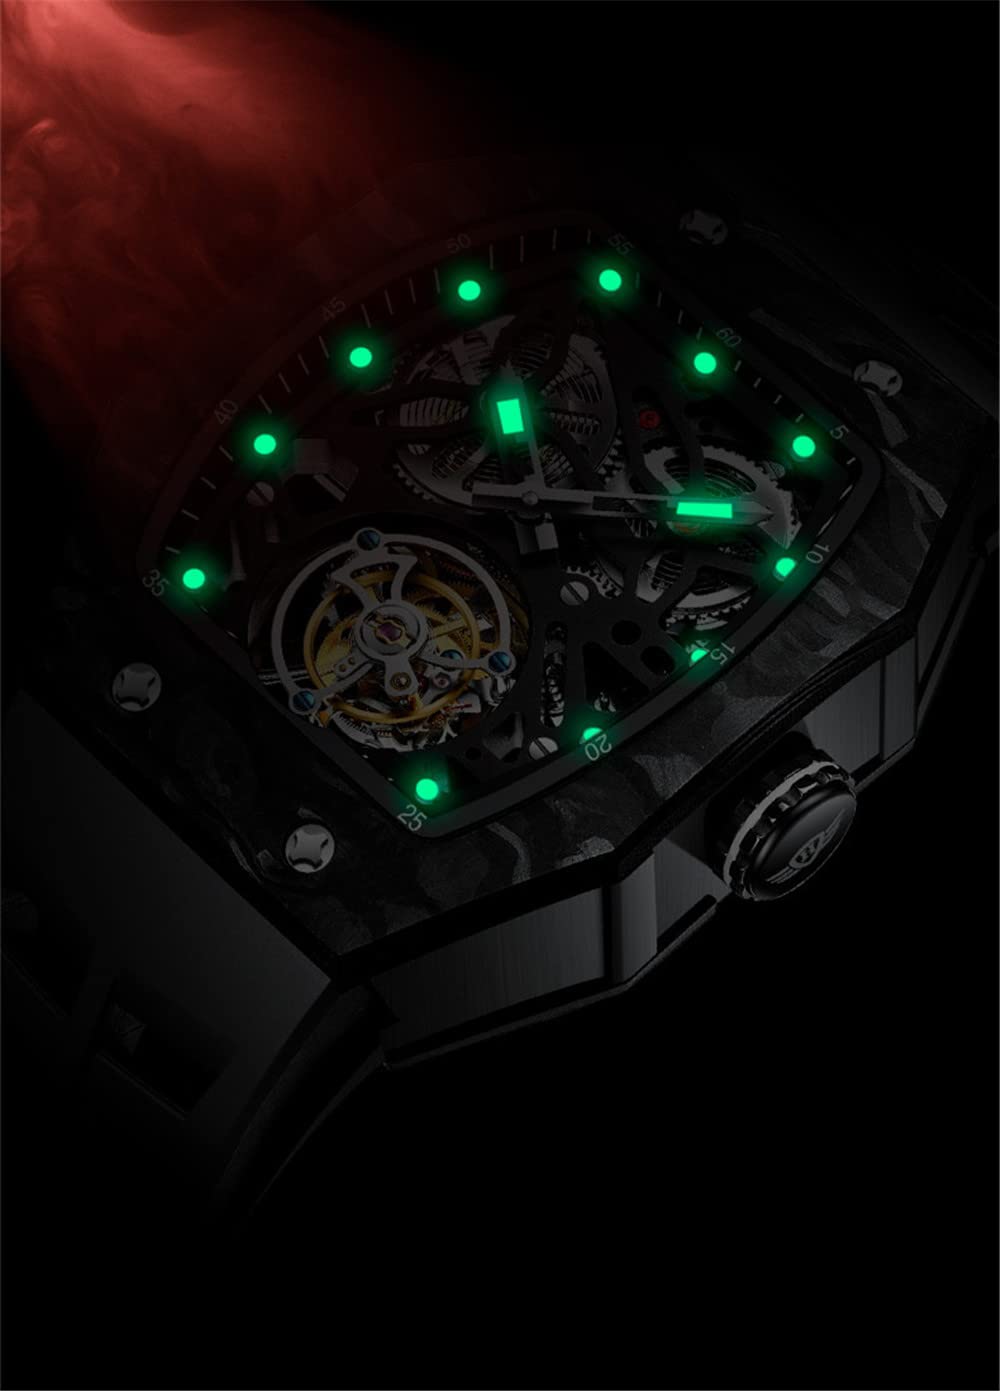 Guanqin Analog Mechanical Hand-Wind Square Wrist Watch Men's Stainless Steel and Silicone Sapphire Male Skeleton Real Tourbillon Clock Waterproof Luminous Chronograph